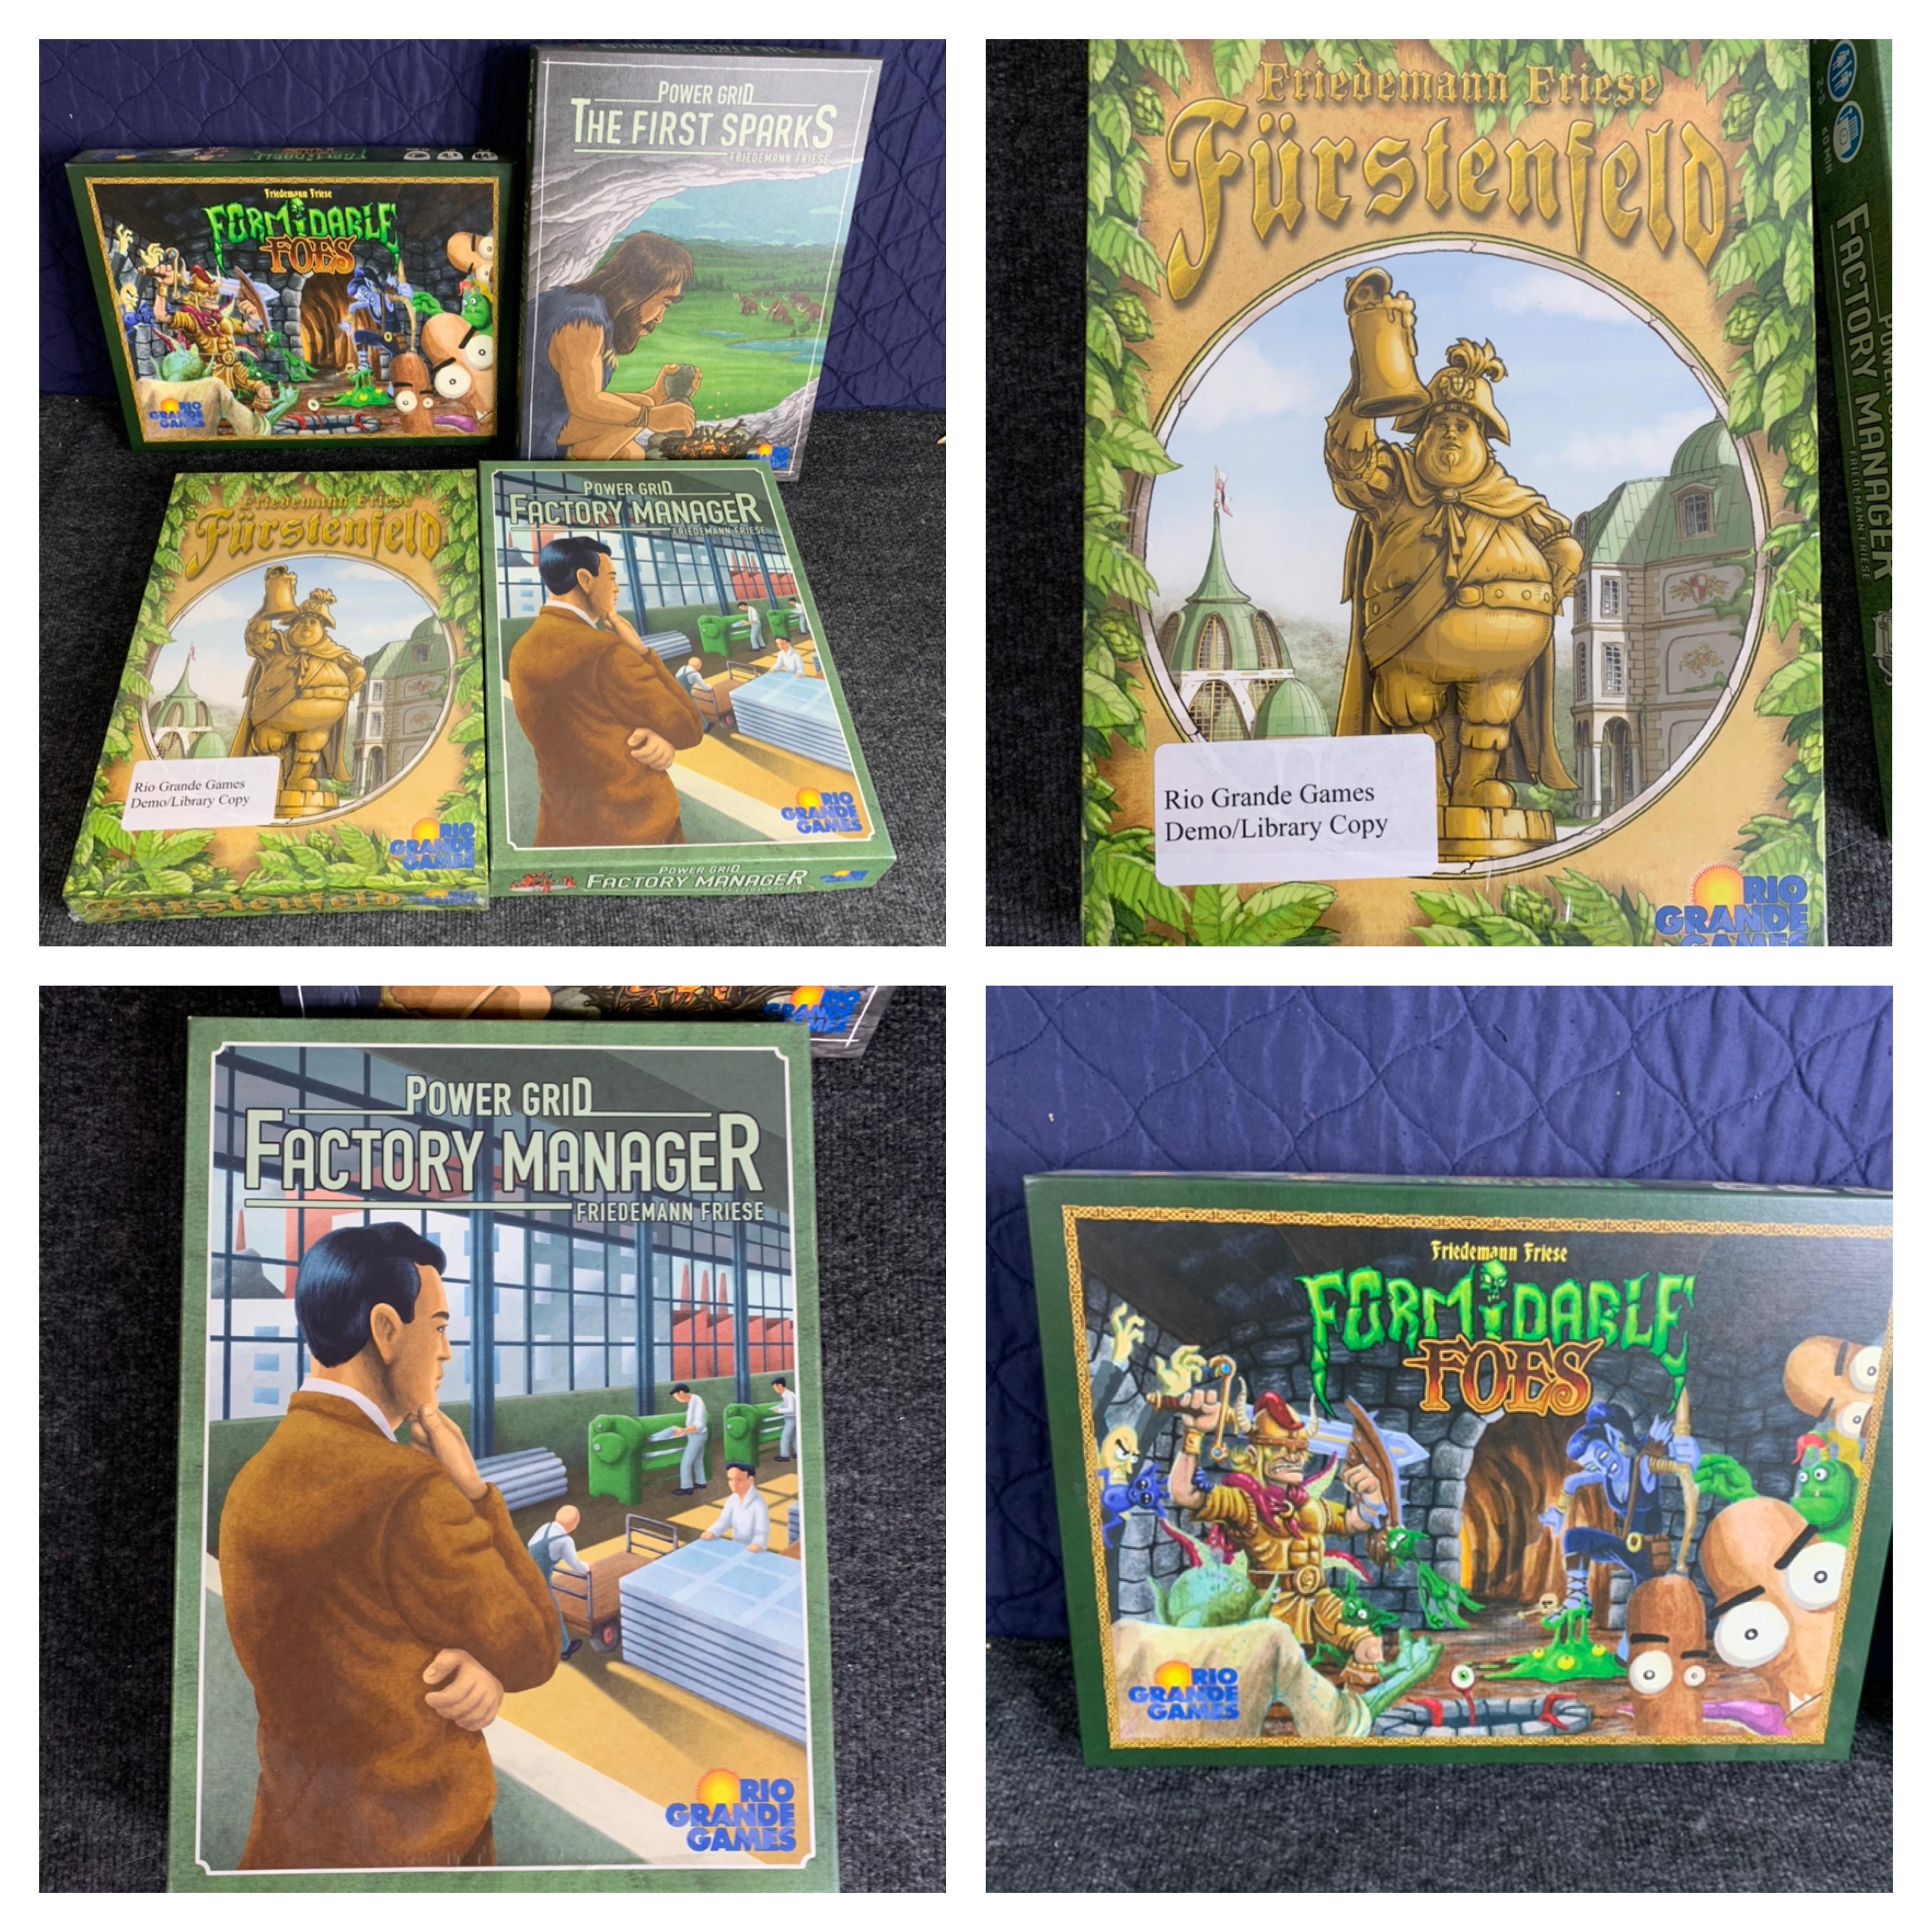 Formidable Foes, Furstenfeld, Power Grid: Factory Manager, Power Grid: The First Sparks